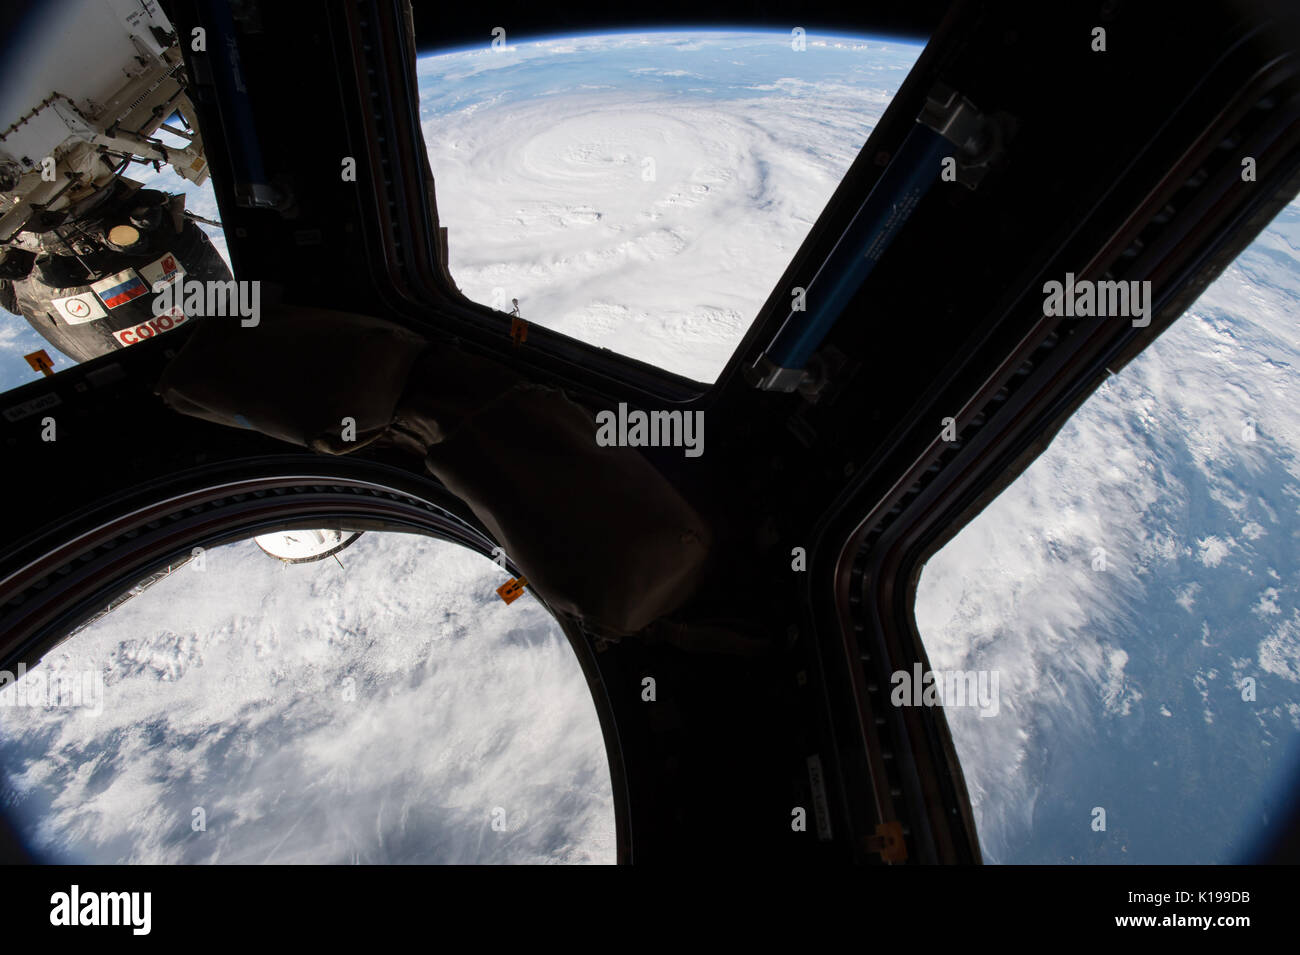 View of massive Hurricane Harvey from the Cupola of the International Space Station as the storm approaches the coast of Texas August 25, 2017. Hurricane Harvey is now a category 4 storm expected to hit the Texas coast causing major damage and flooding. Stock Photo